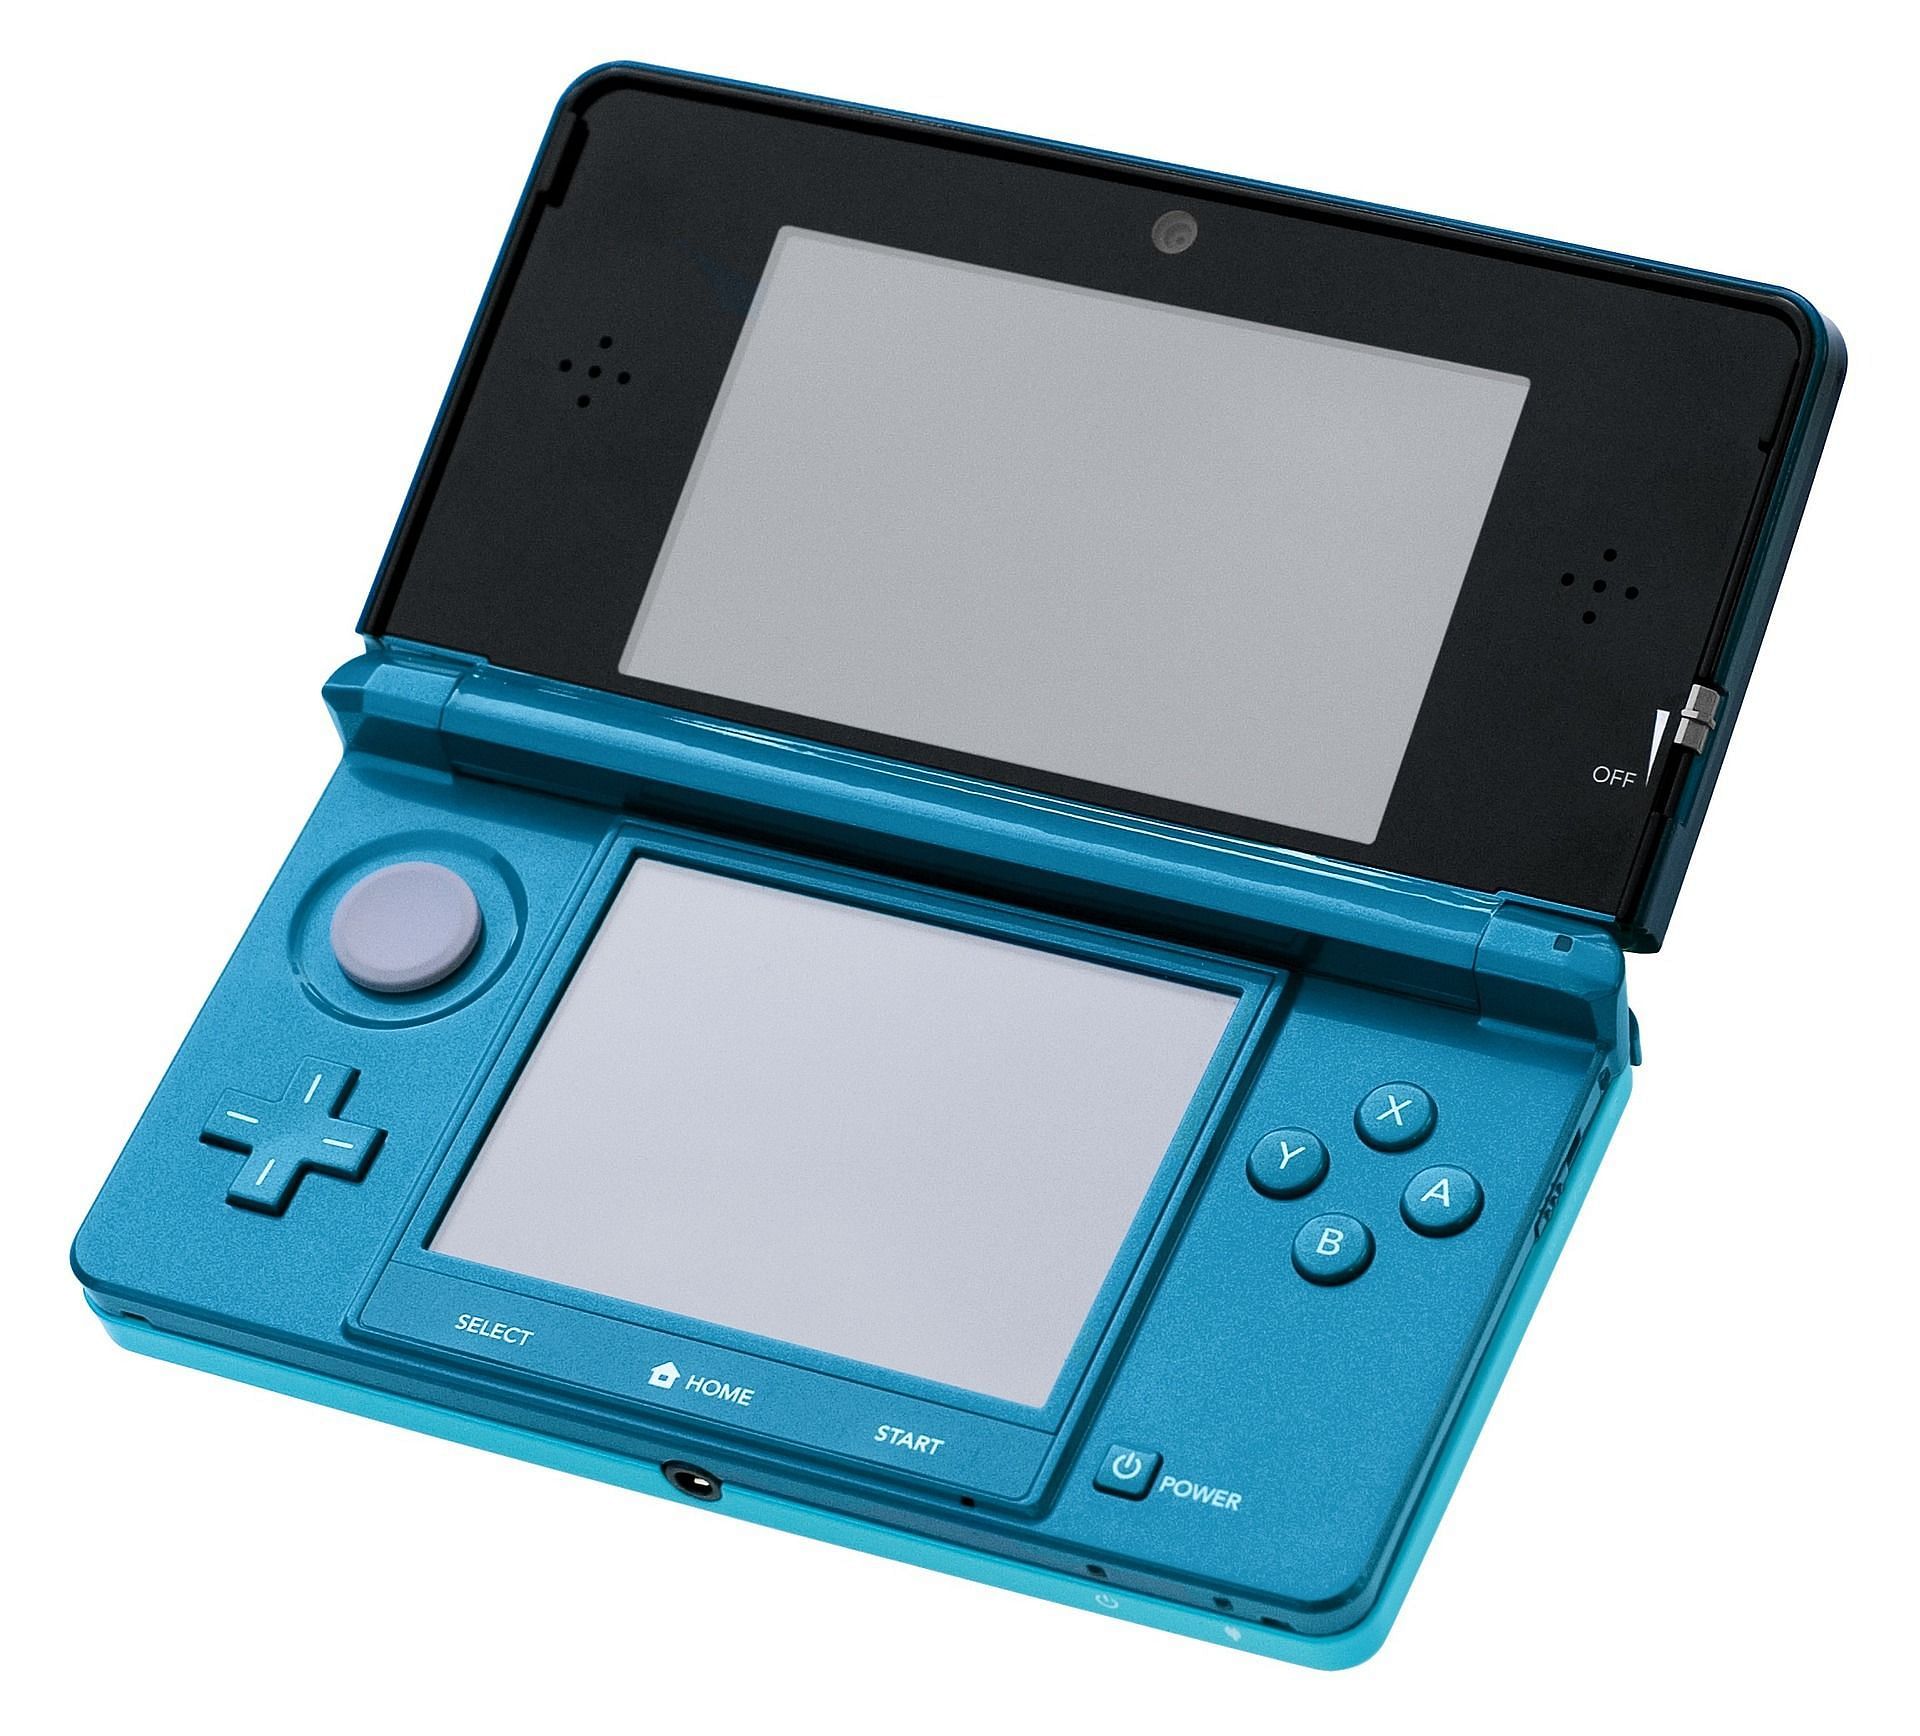 Nintendo&#039;s 3DS was the prime competitor of the PS Vita (Image by WikimediaImages from Pixabay)